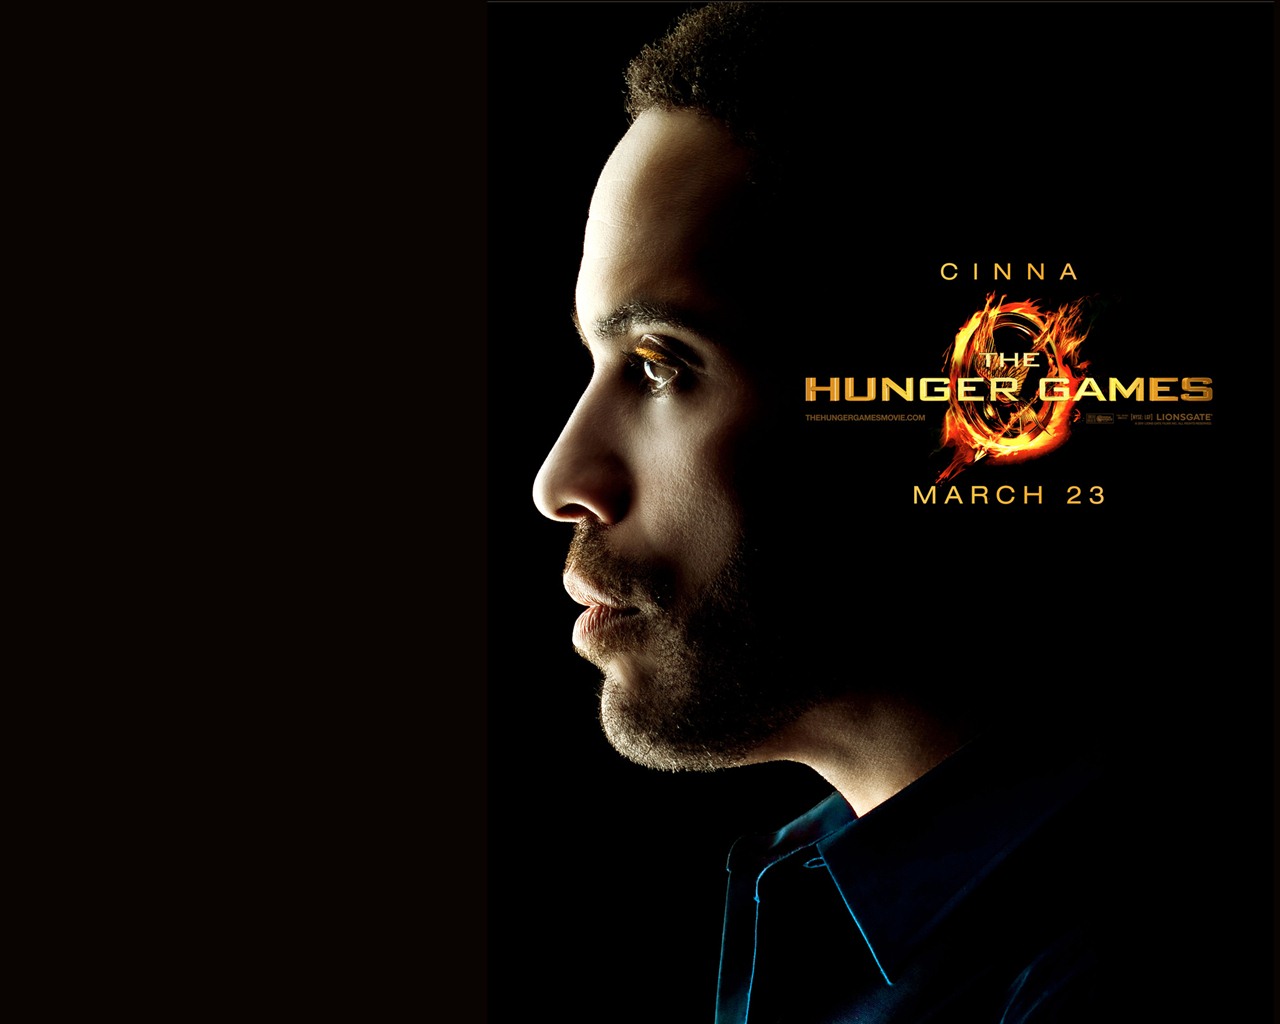 The Hunger Games HD wallpapers #11 - 1280x1024